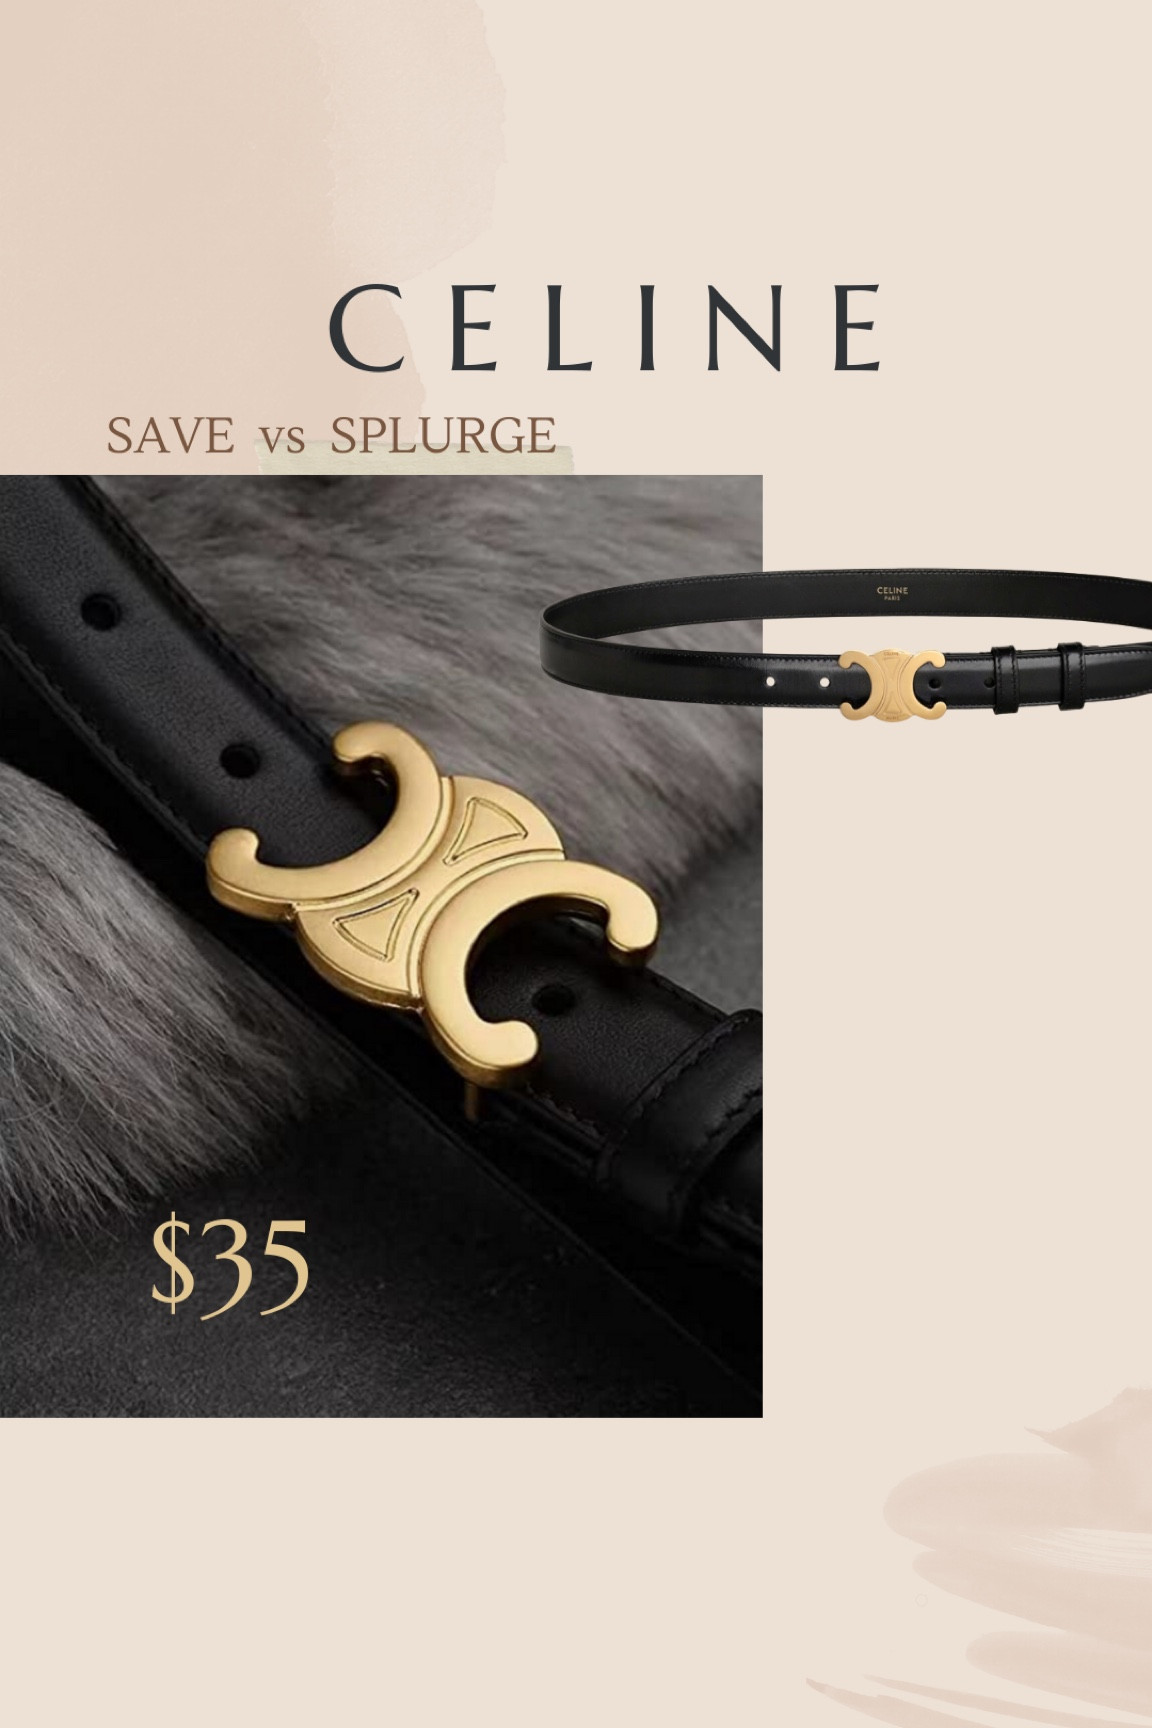 Black Leather Waist Belt With … curated on LTK